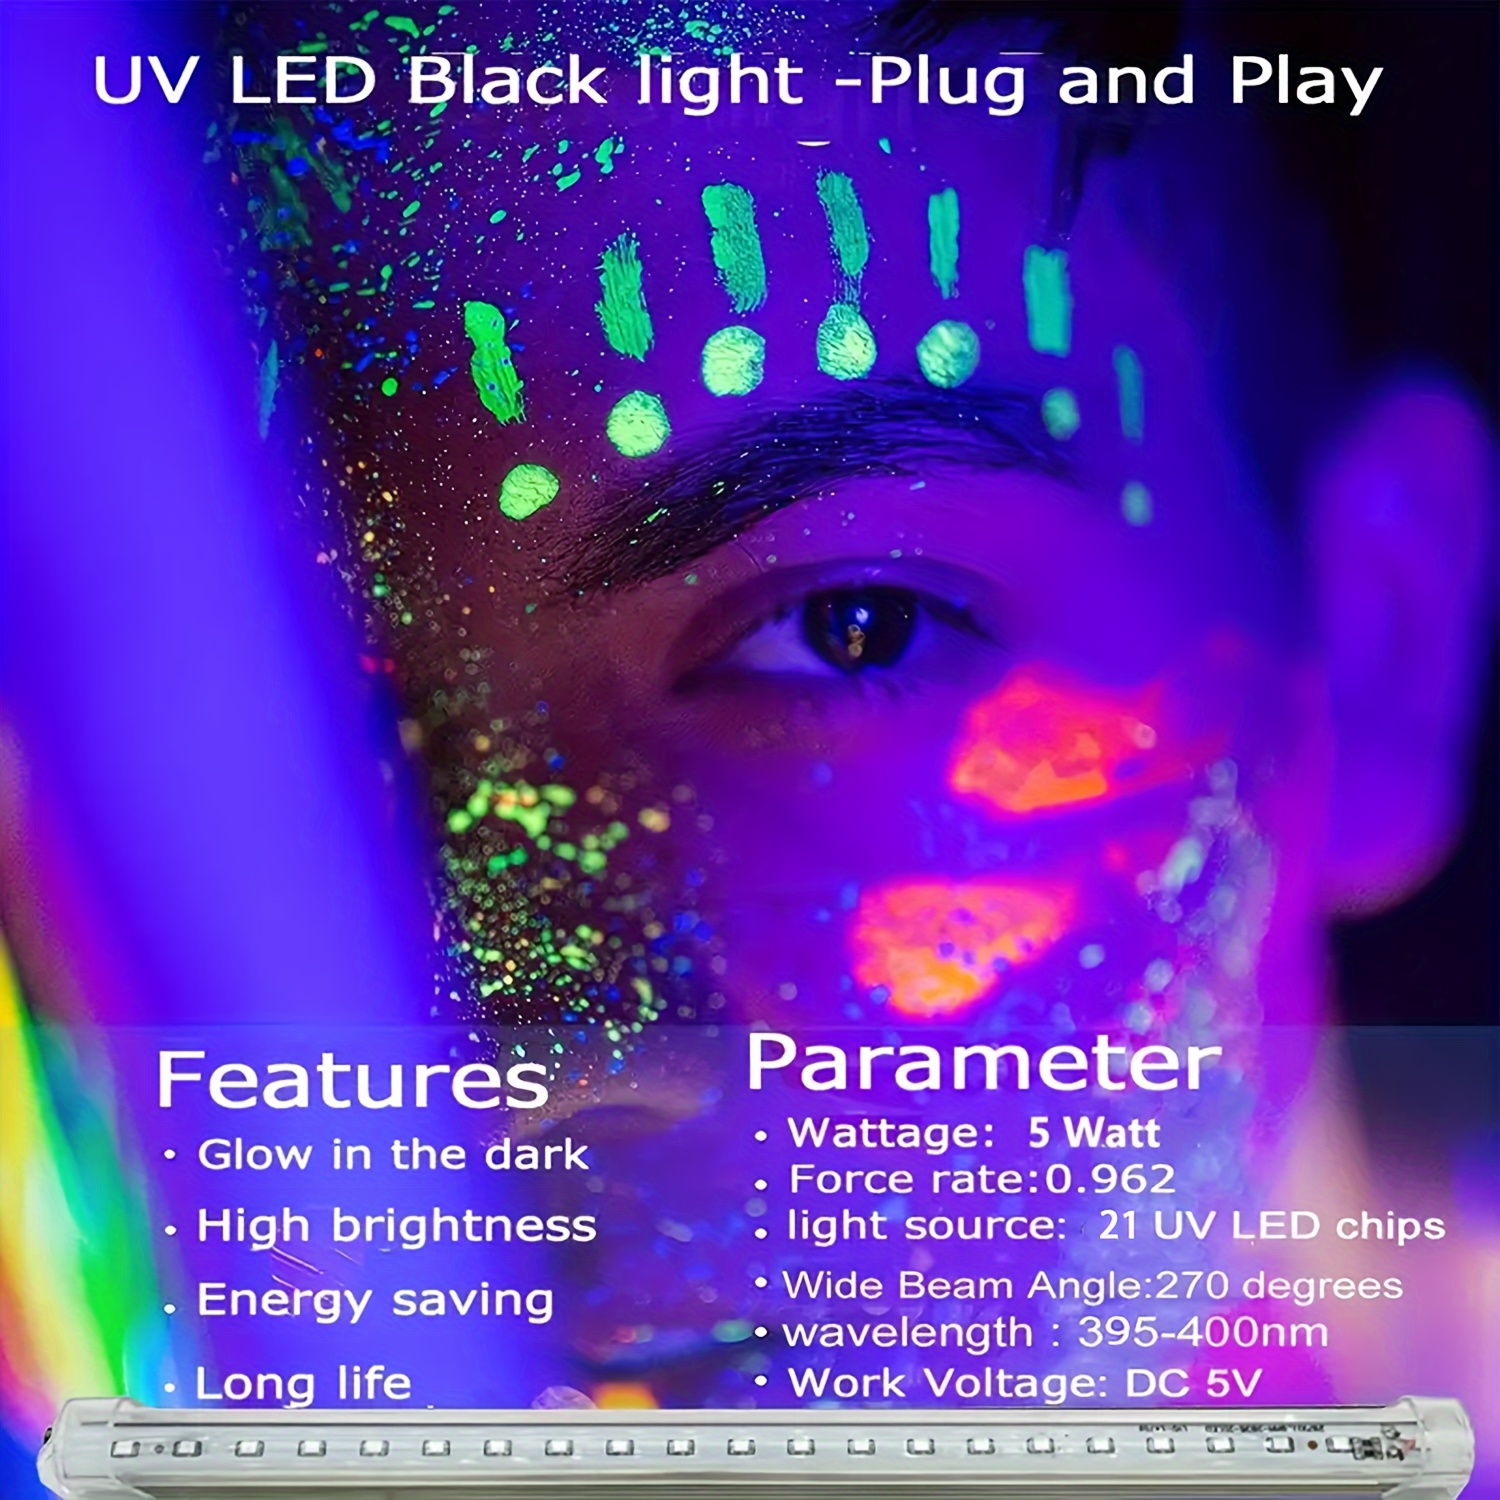 Neon Party - The Complete Party Guide - Black light LED glow party kits UV  ultra violet lights neon party